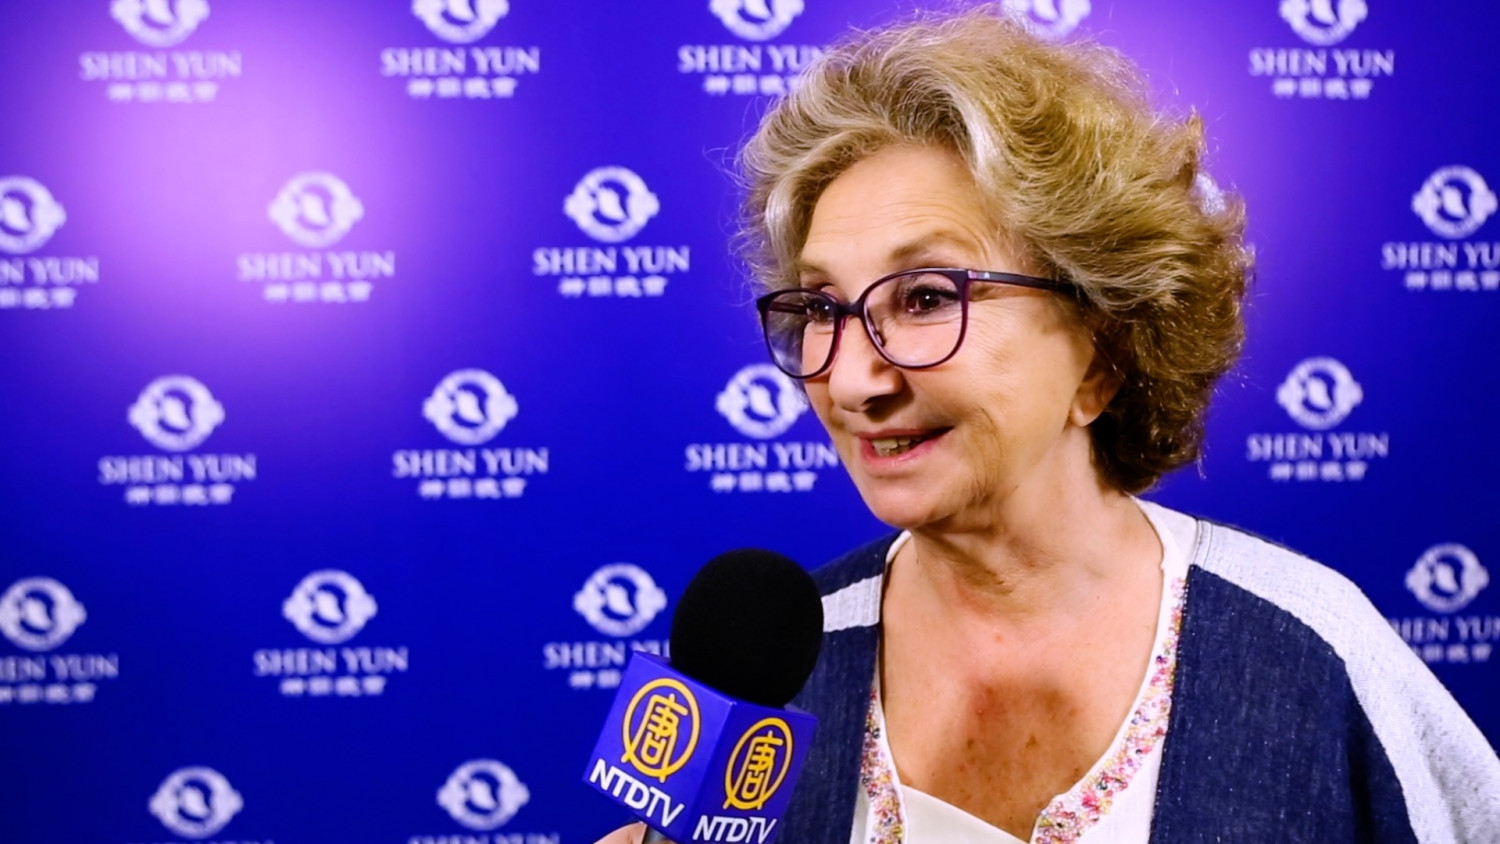 Shen Yun a ‘Miracle’ Says Acclaimed Argentine Actress